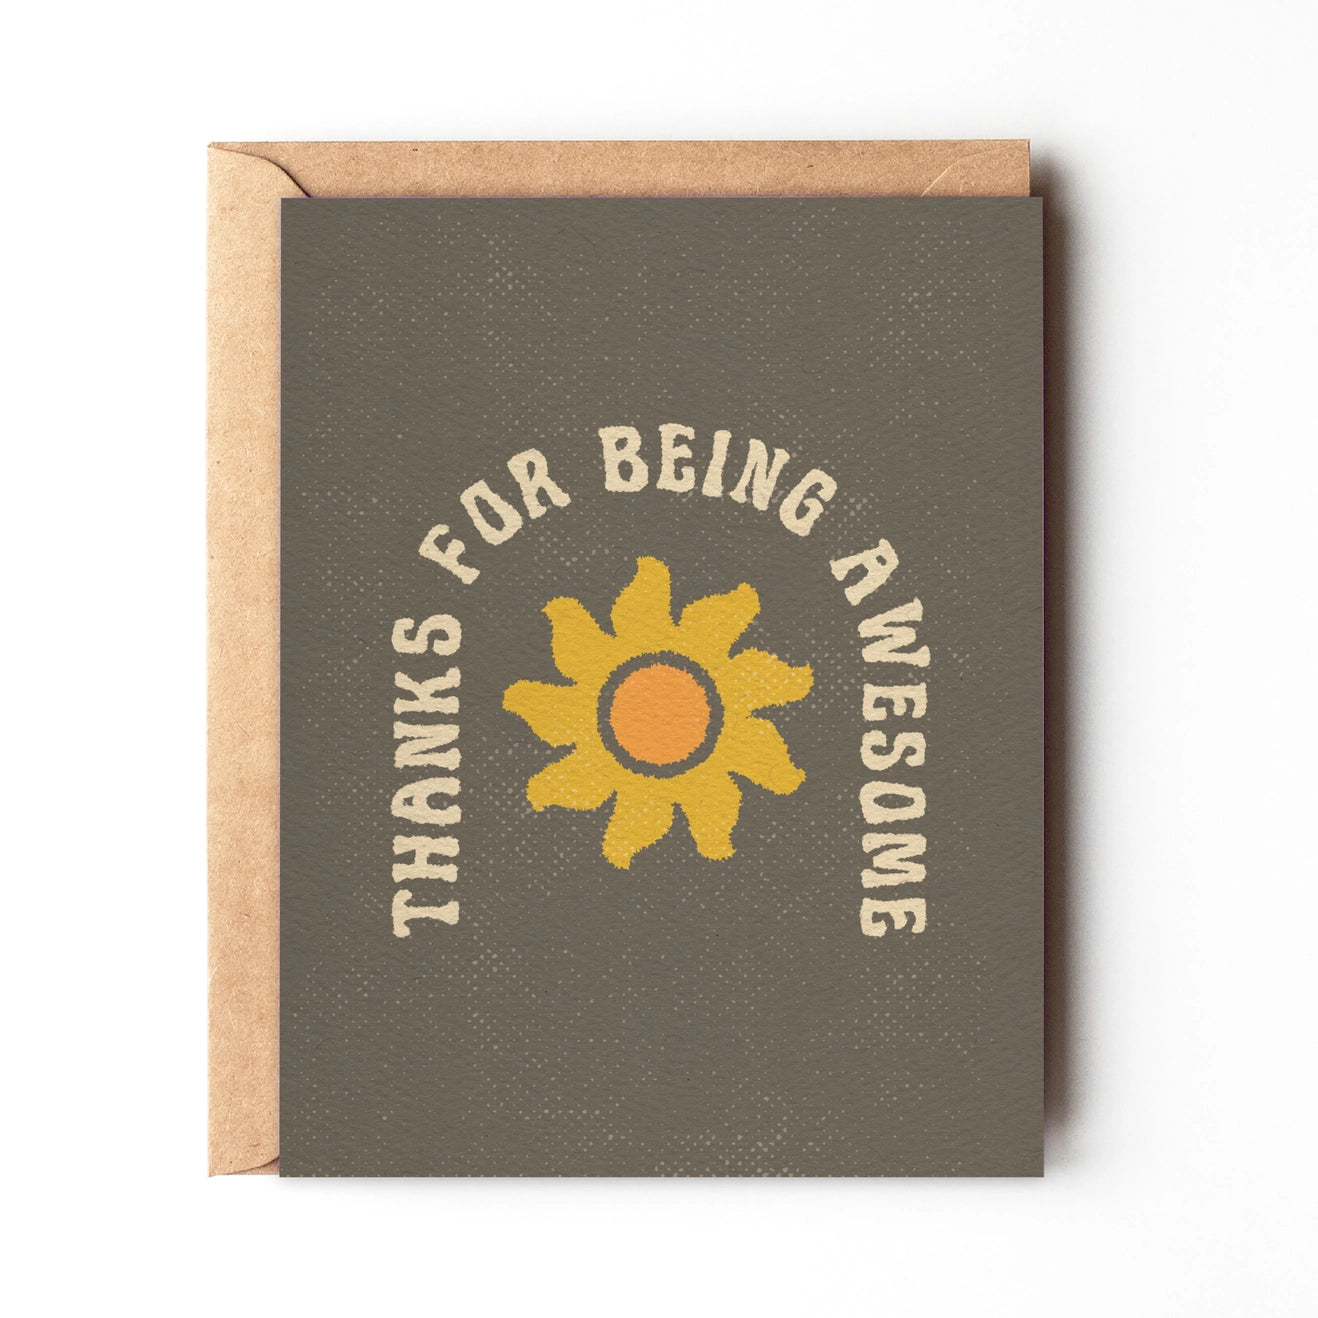 Thanks For Being Awesome - Greeting Card